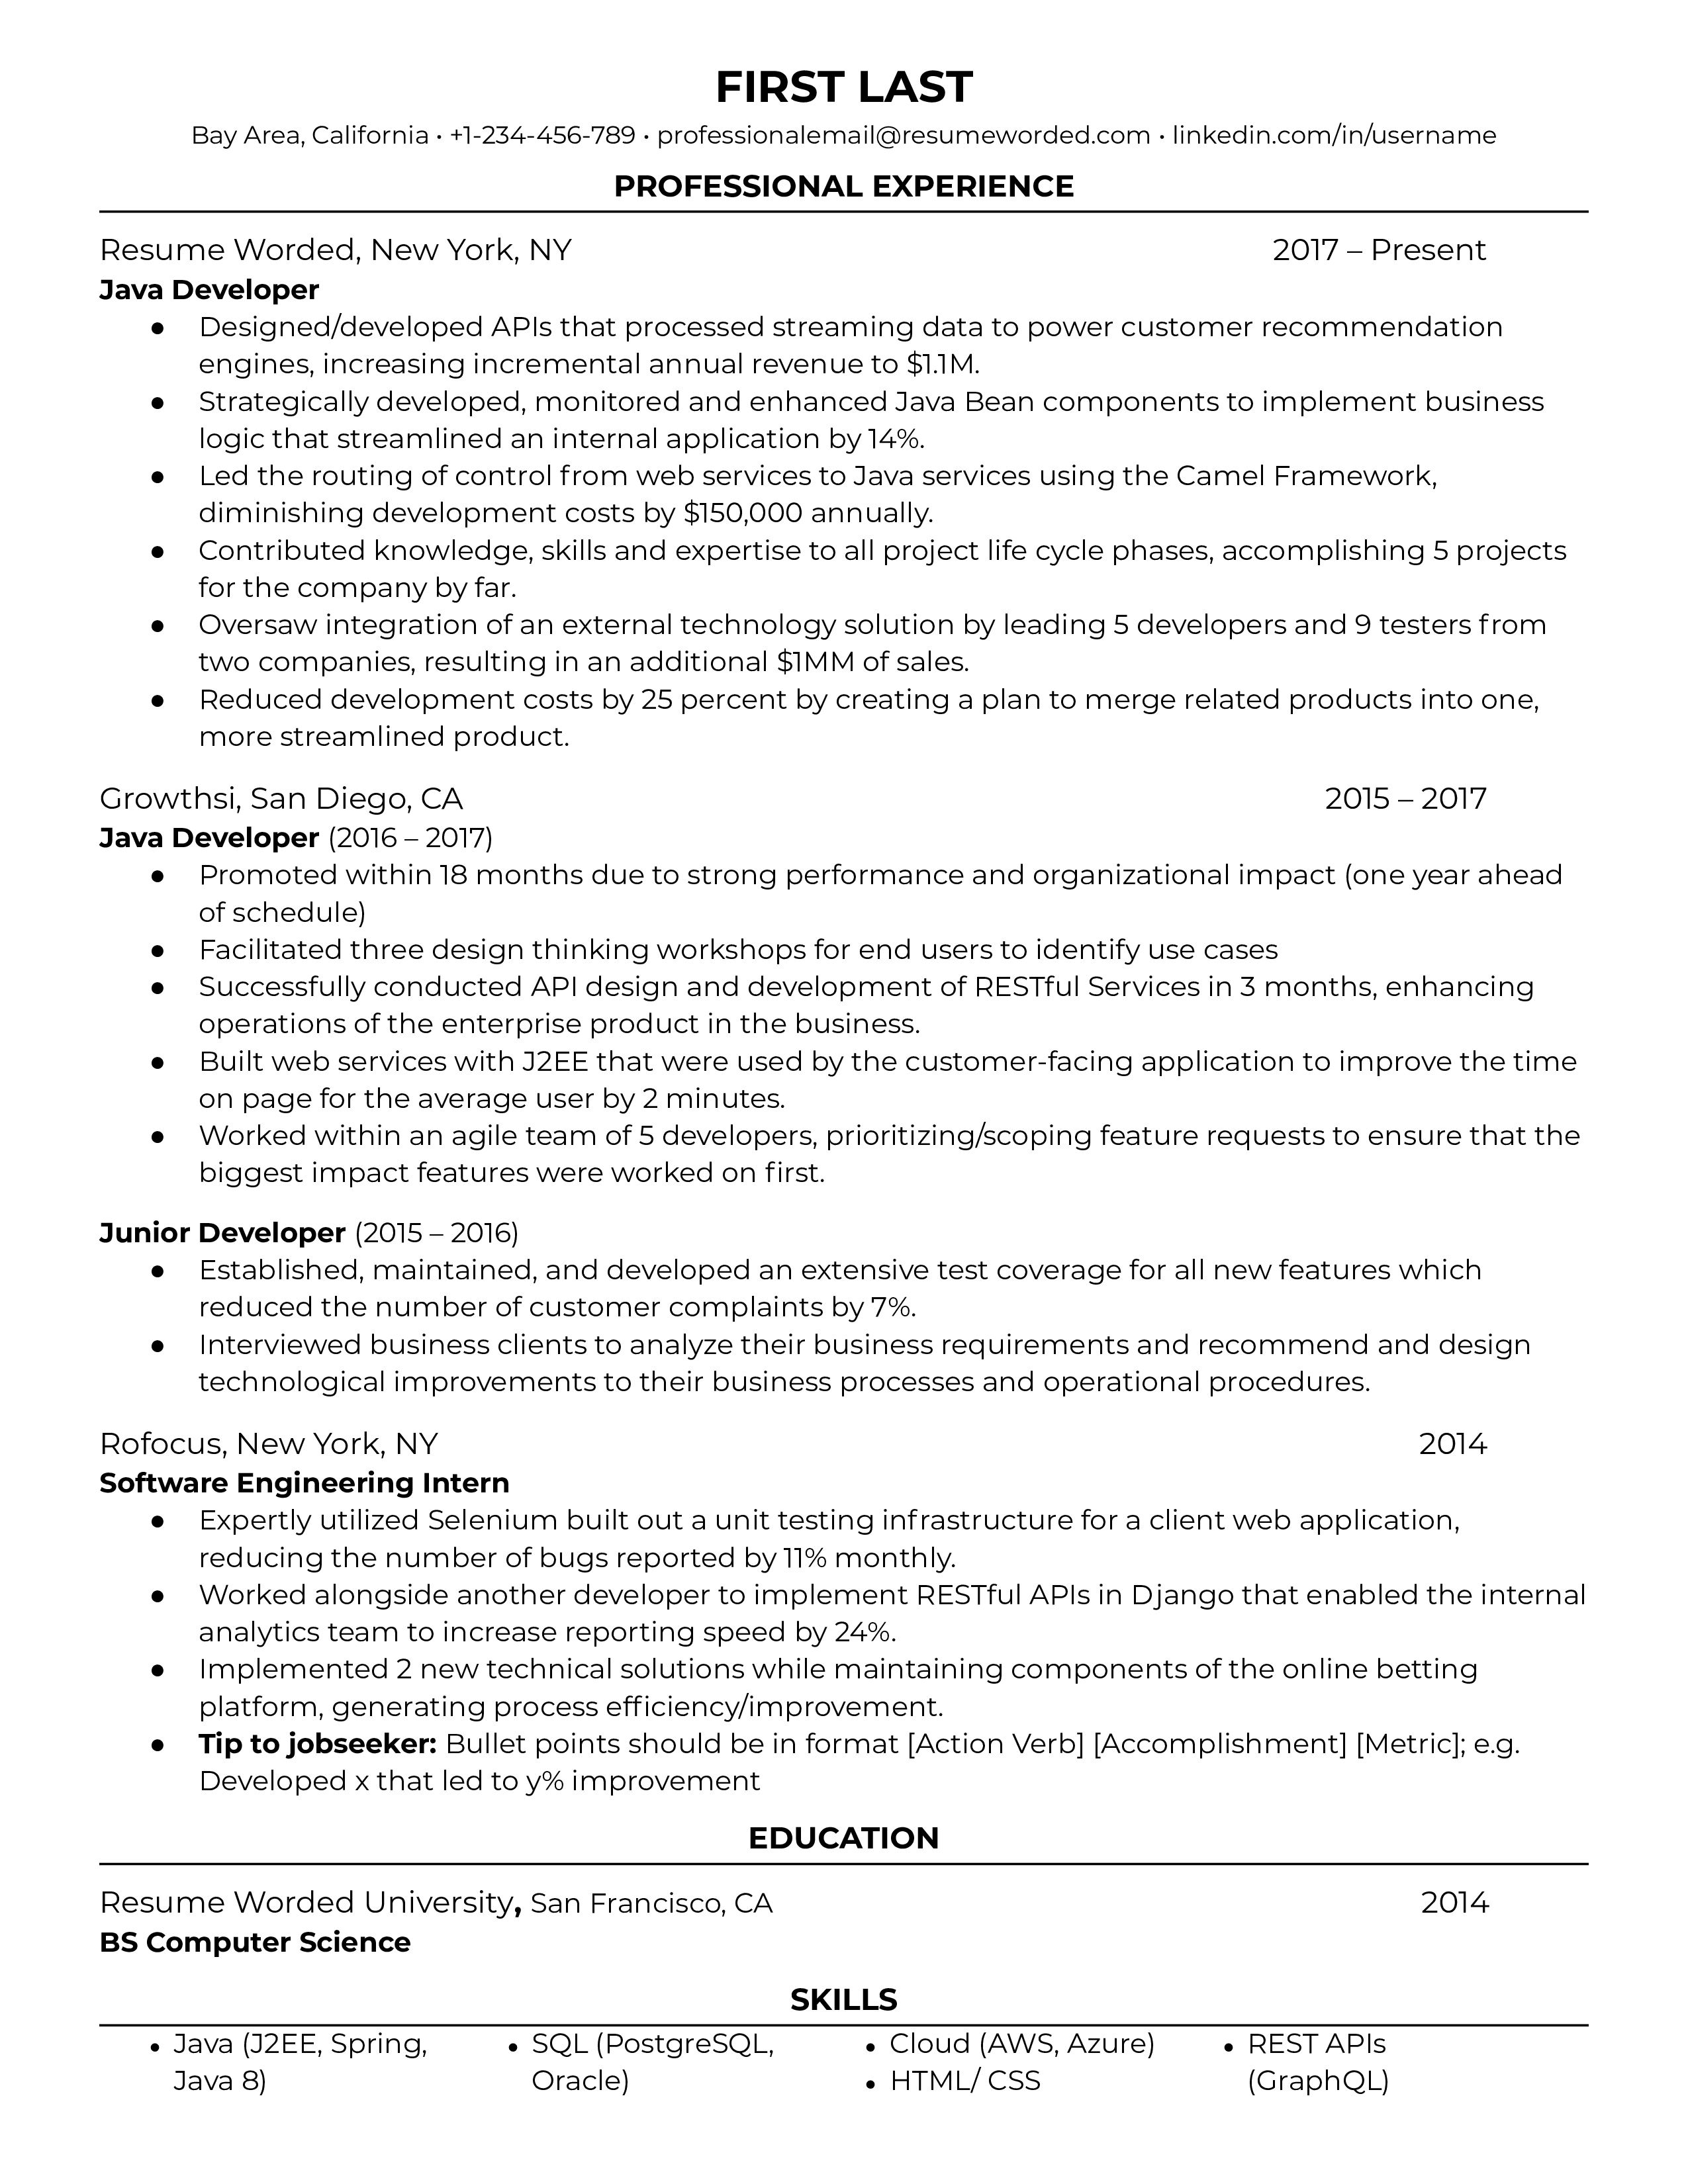 A resume for a java developer with a bachelor's degree and experience as a junior developer and software engineering intern.